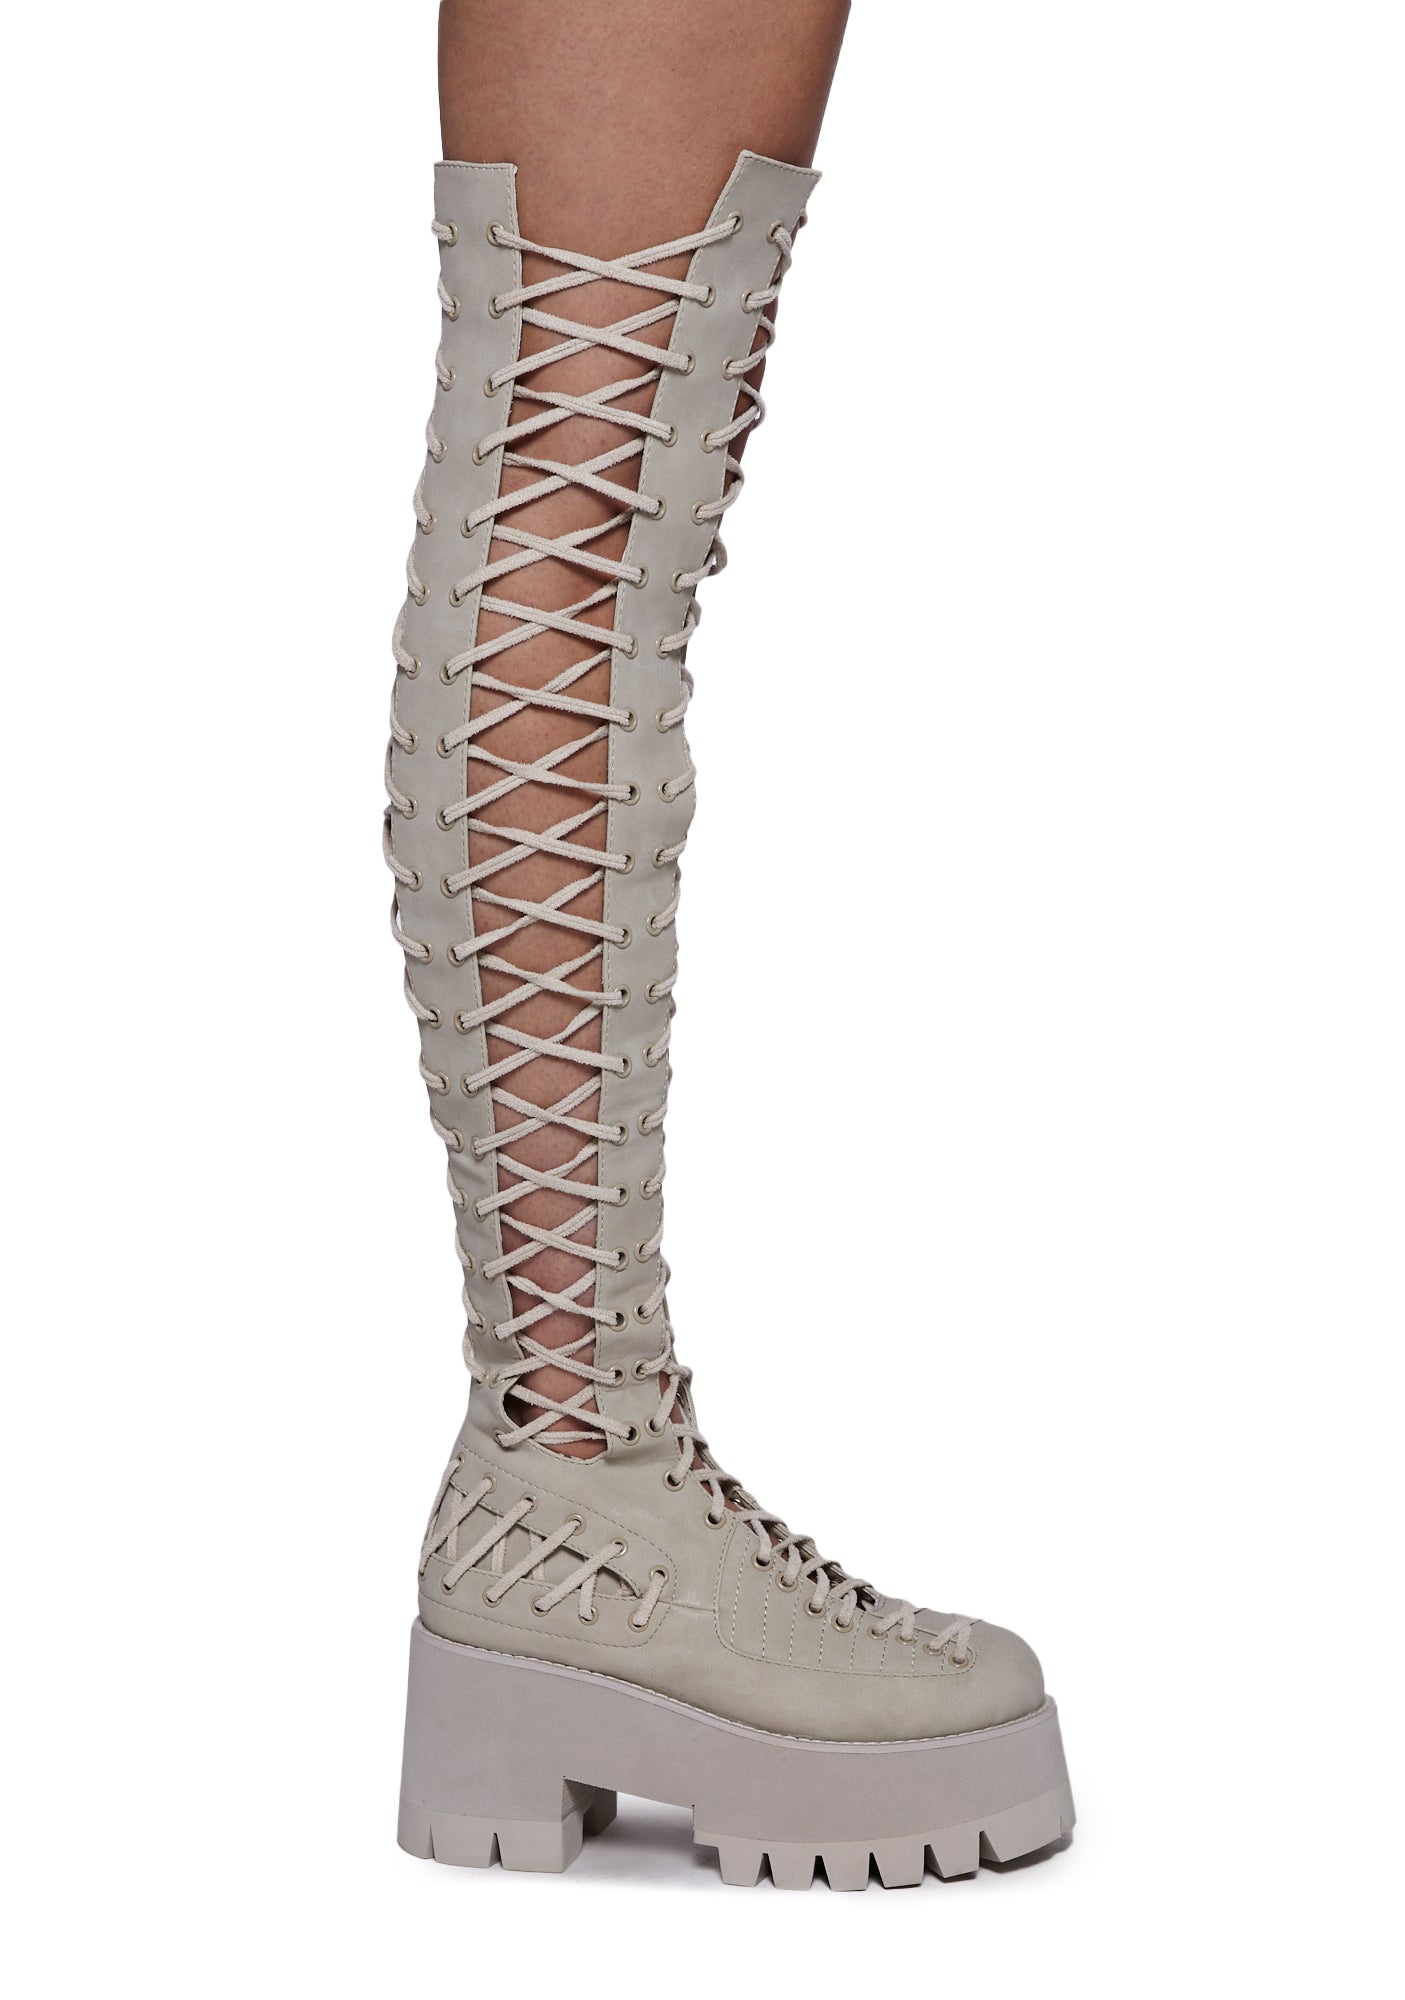 Club Exx Knee High Lace Up Treaded Boots - Light Gray